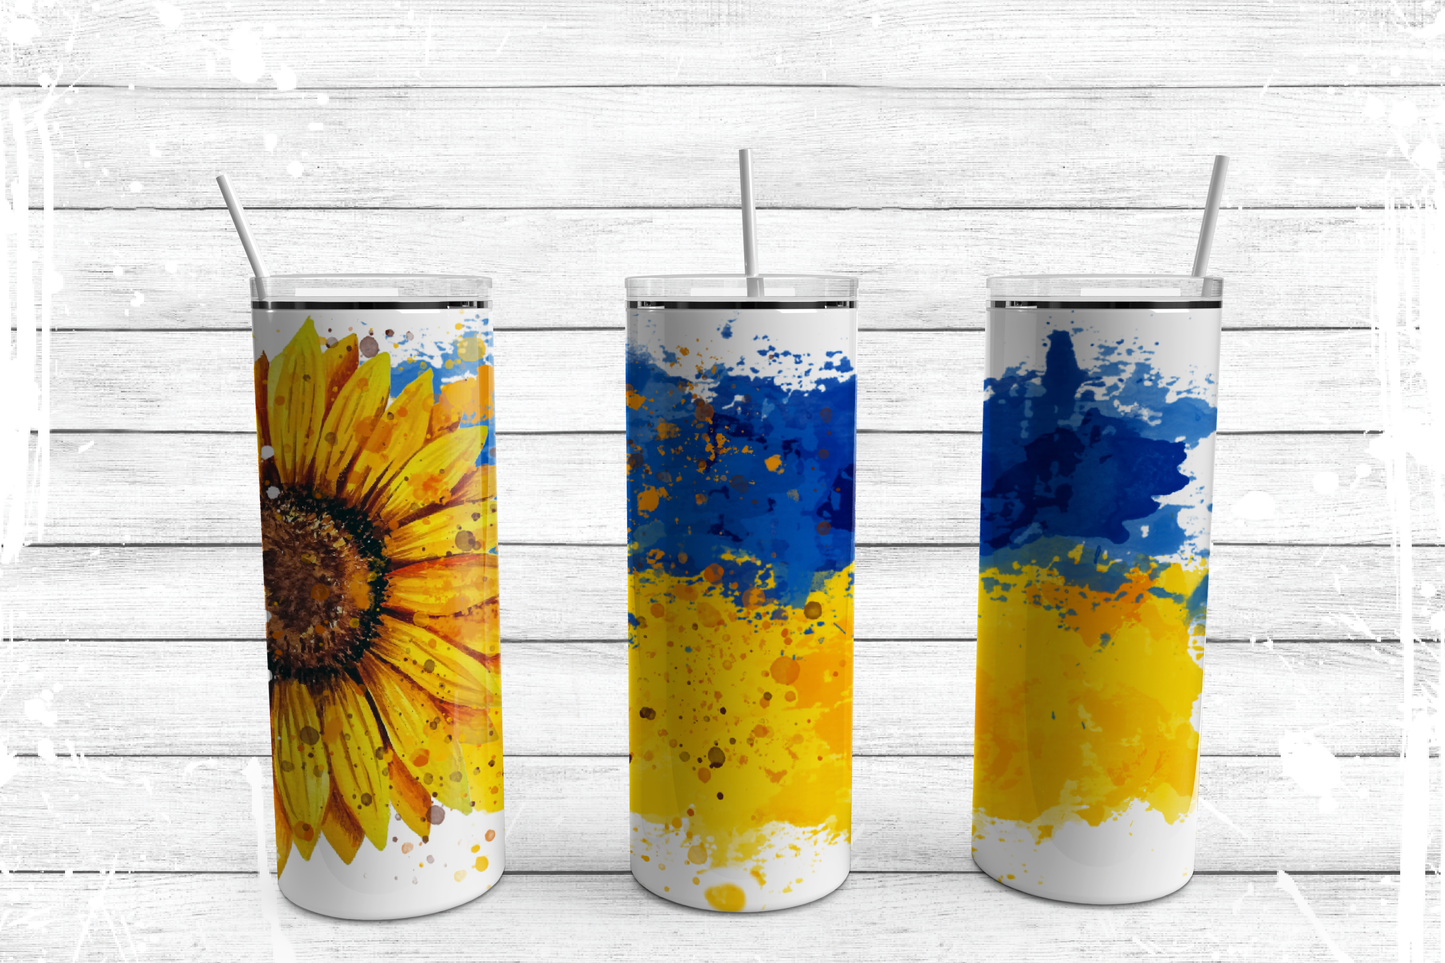 Ukrainian Colors with Sunflower 20oz Skinny Stainless Tumbler